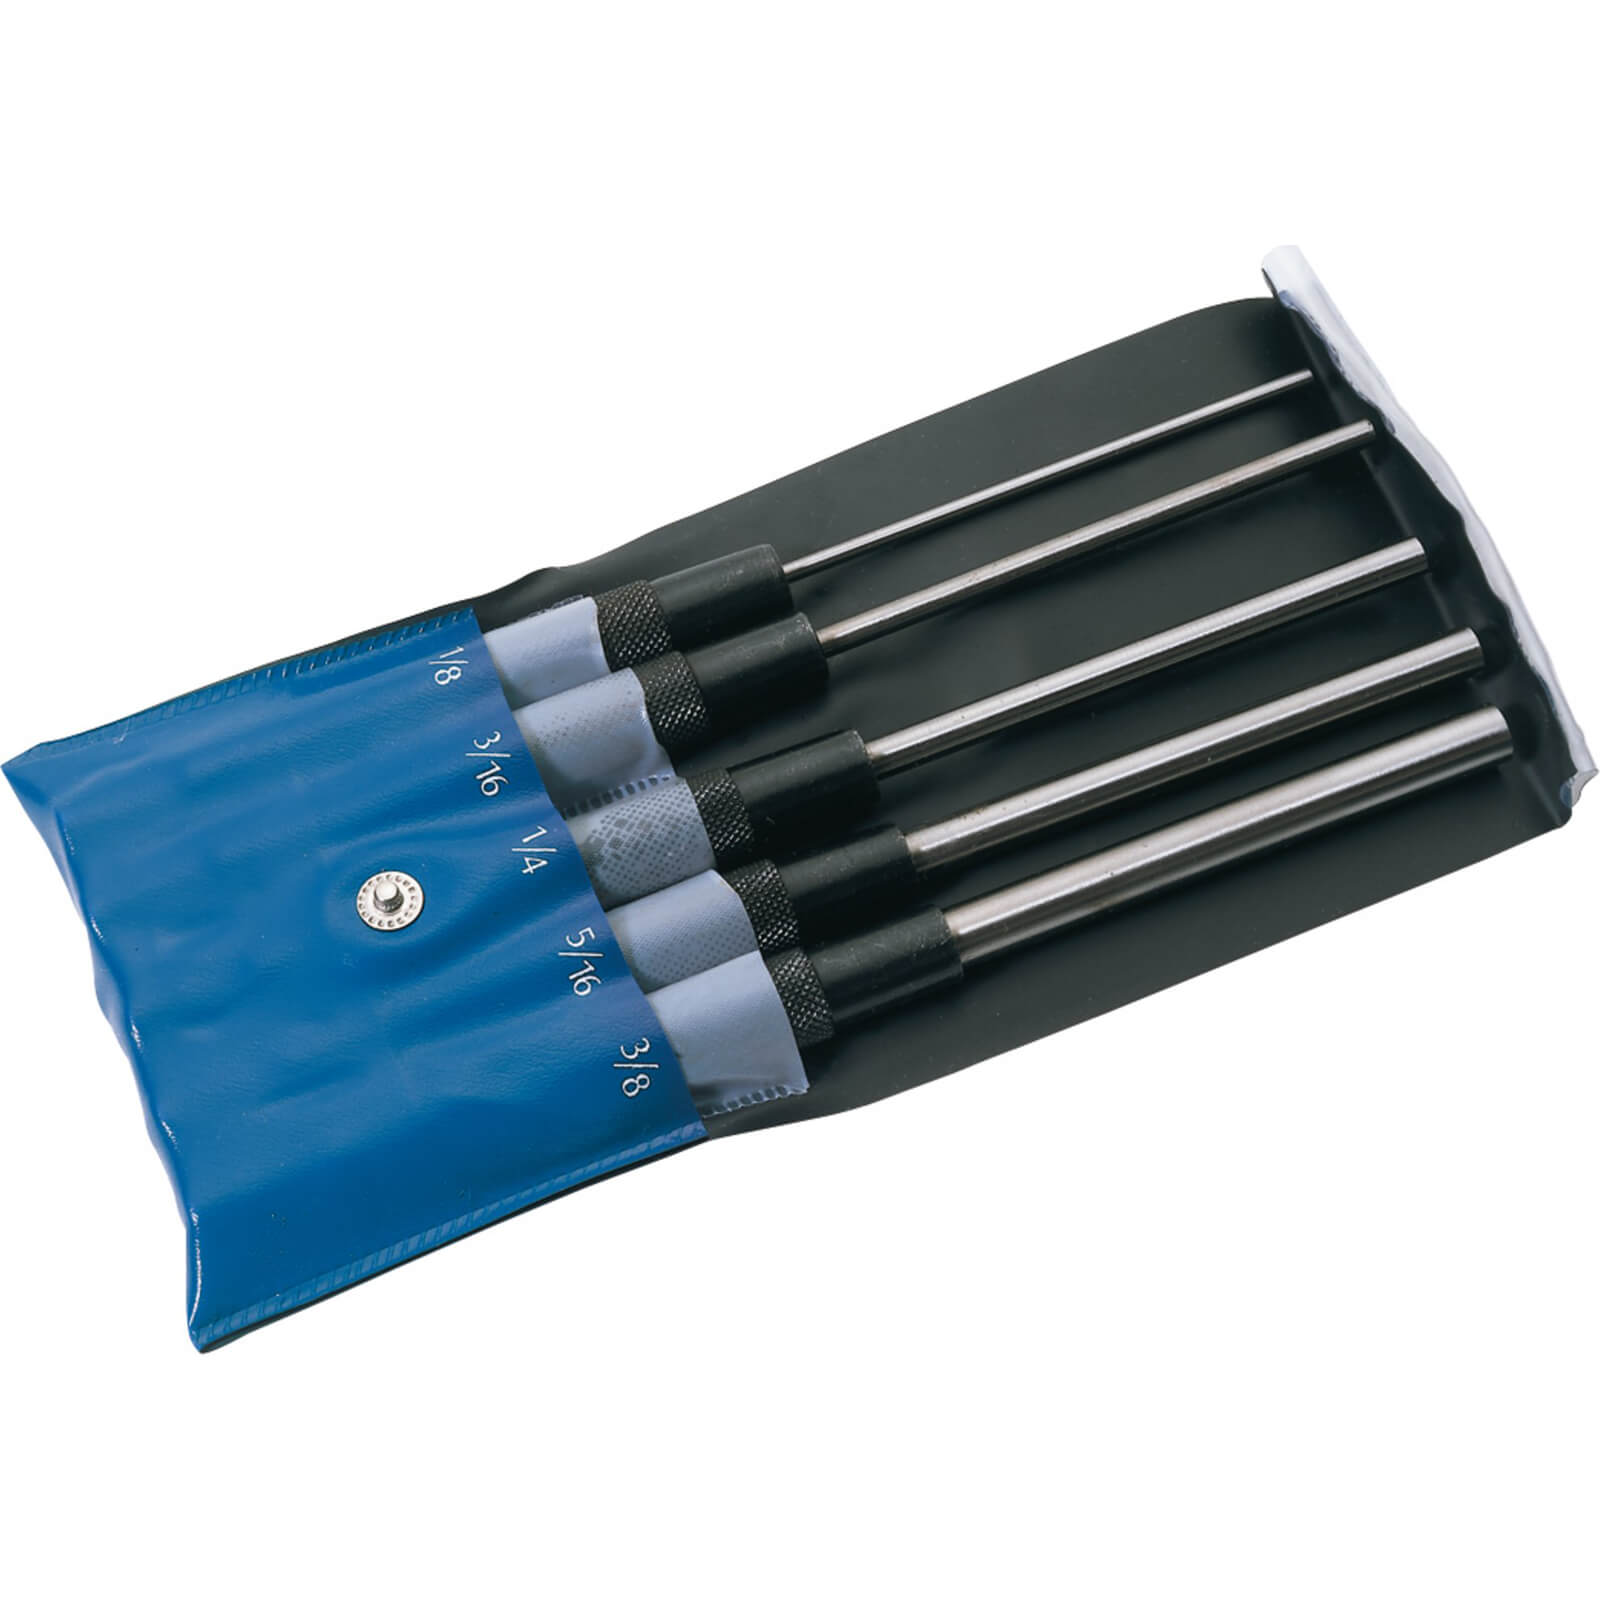 Image of Draper 5 Piece Parallel Pin Punch Set